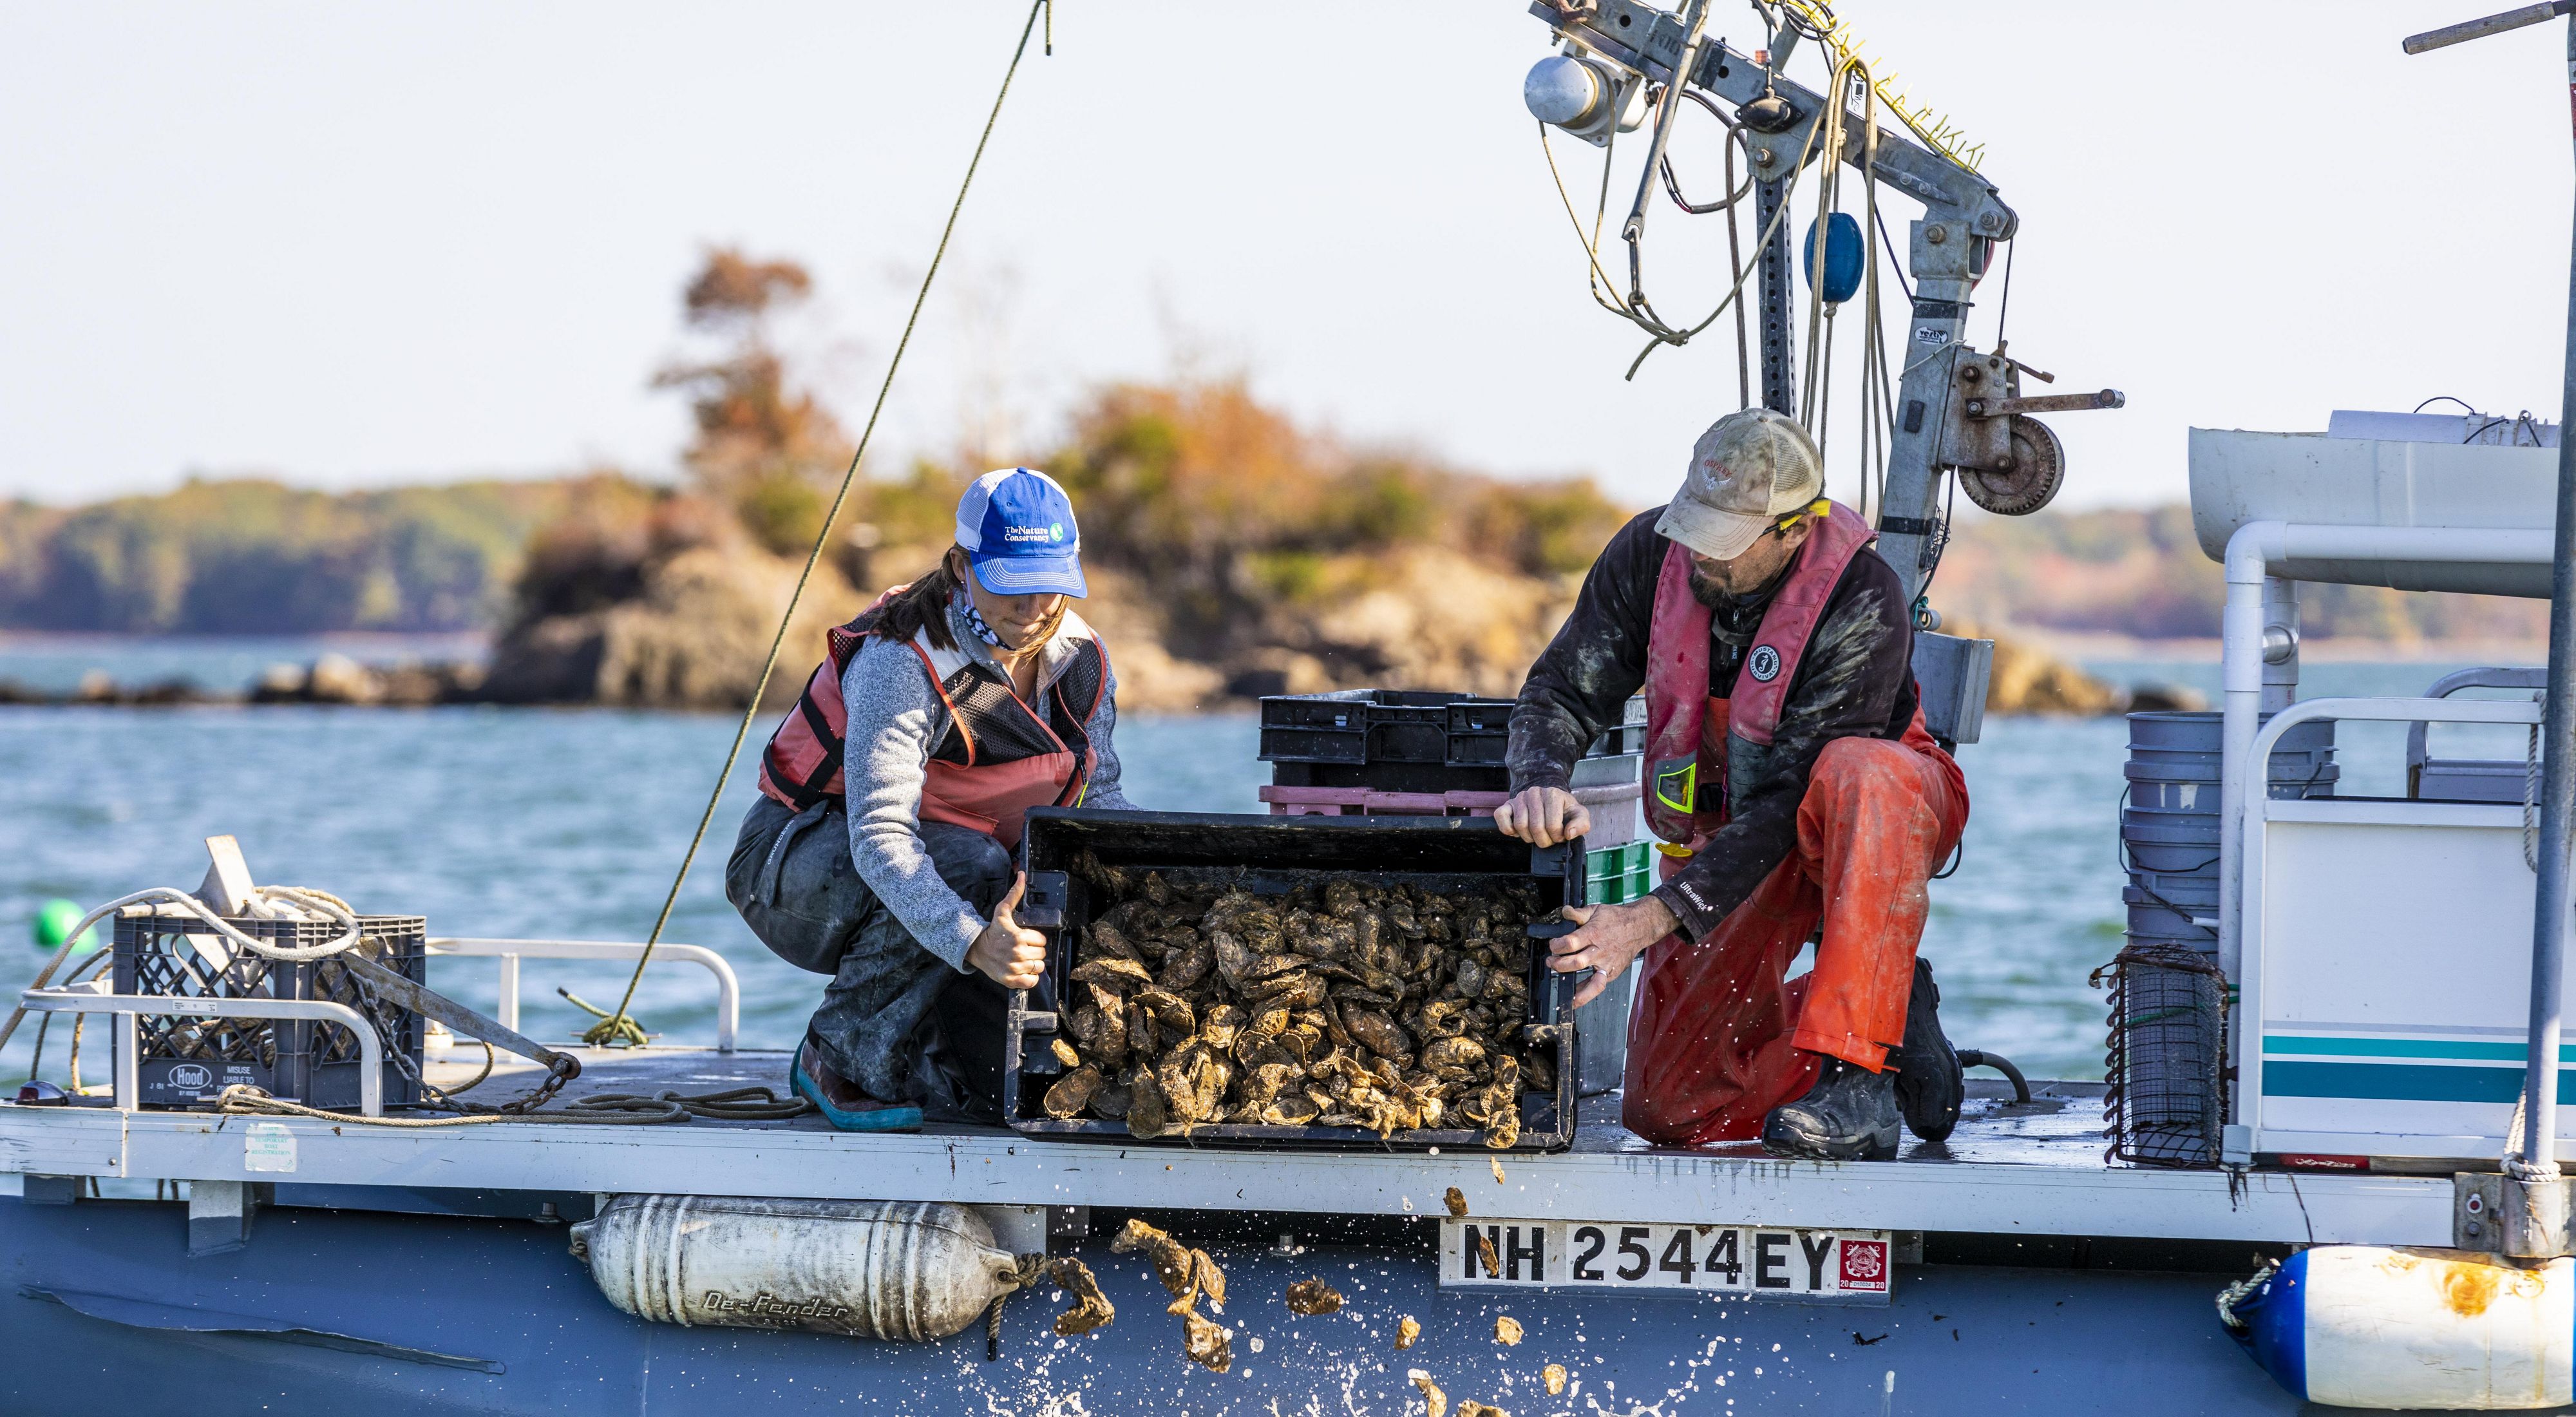 Two people kneel on a boat, dumping a carton of oysters into the water.